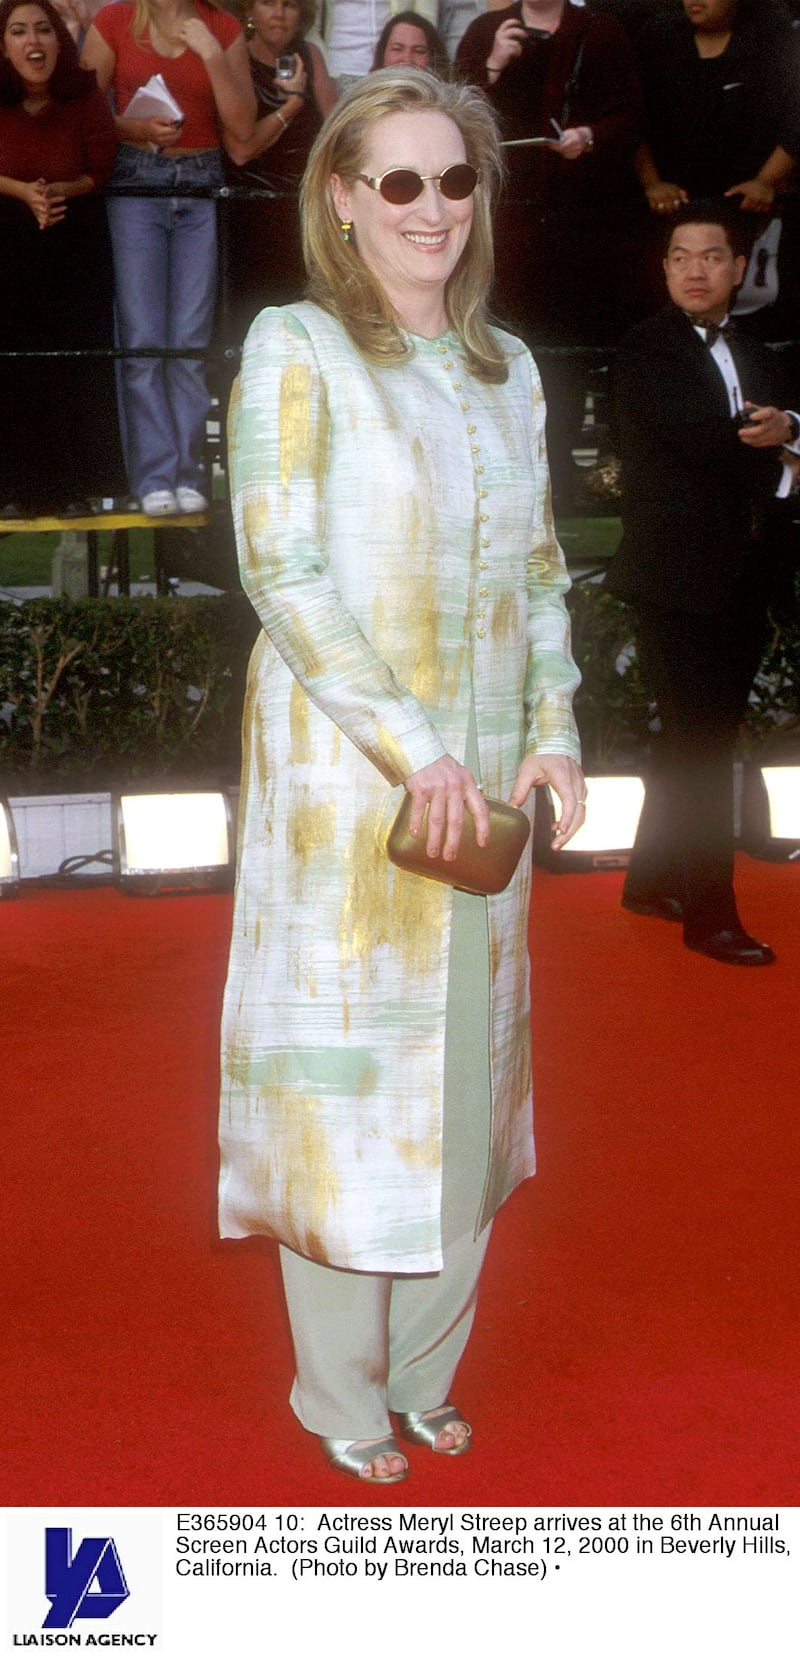 E365904 10: Actress Meryl Streep arrives at the 6th Annual Screen Actors Guild Awards, March 12, 2000 in Beverly Hills, California. (Photo by Brenda Chase)